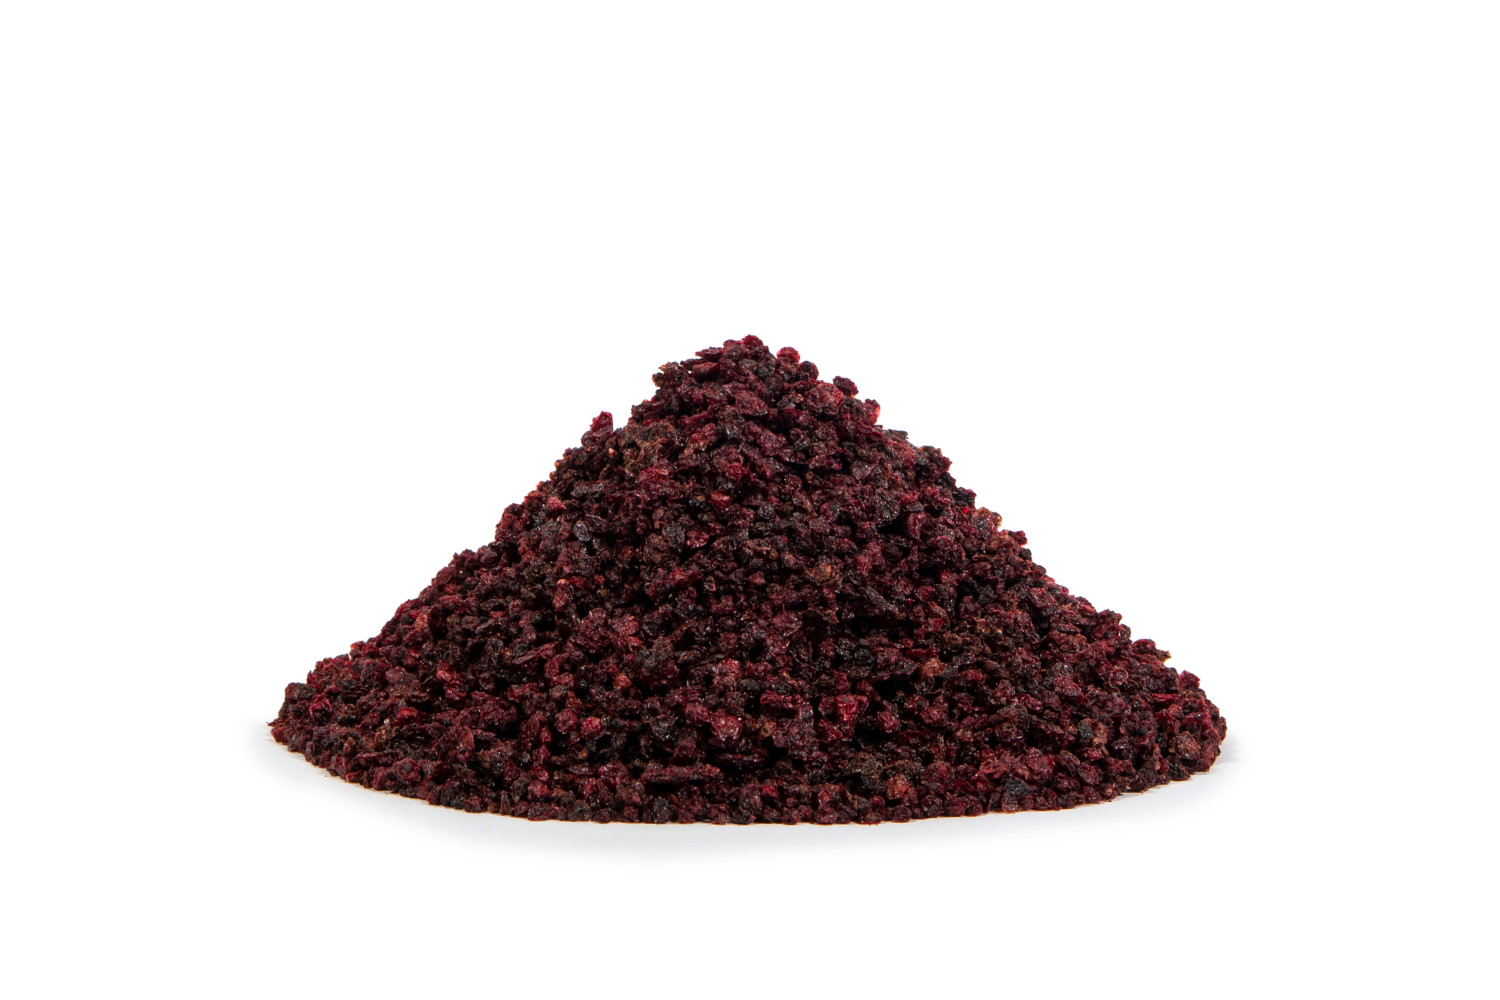 Whole dehydrated red currant